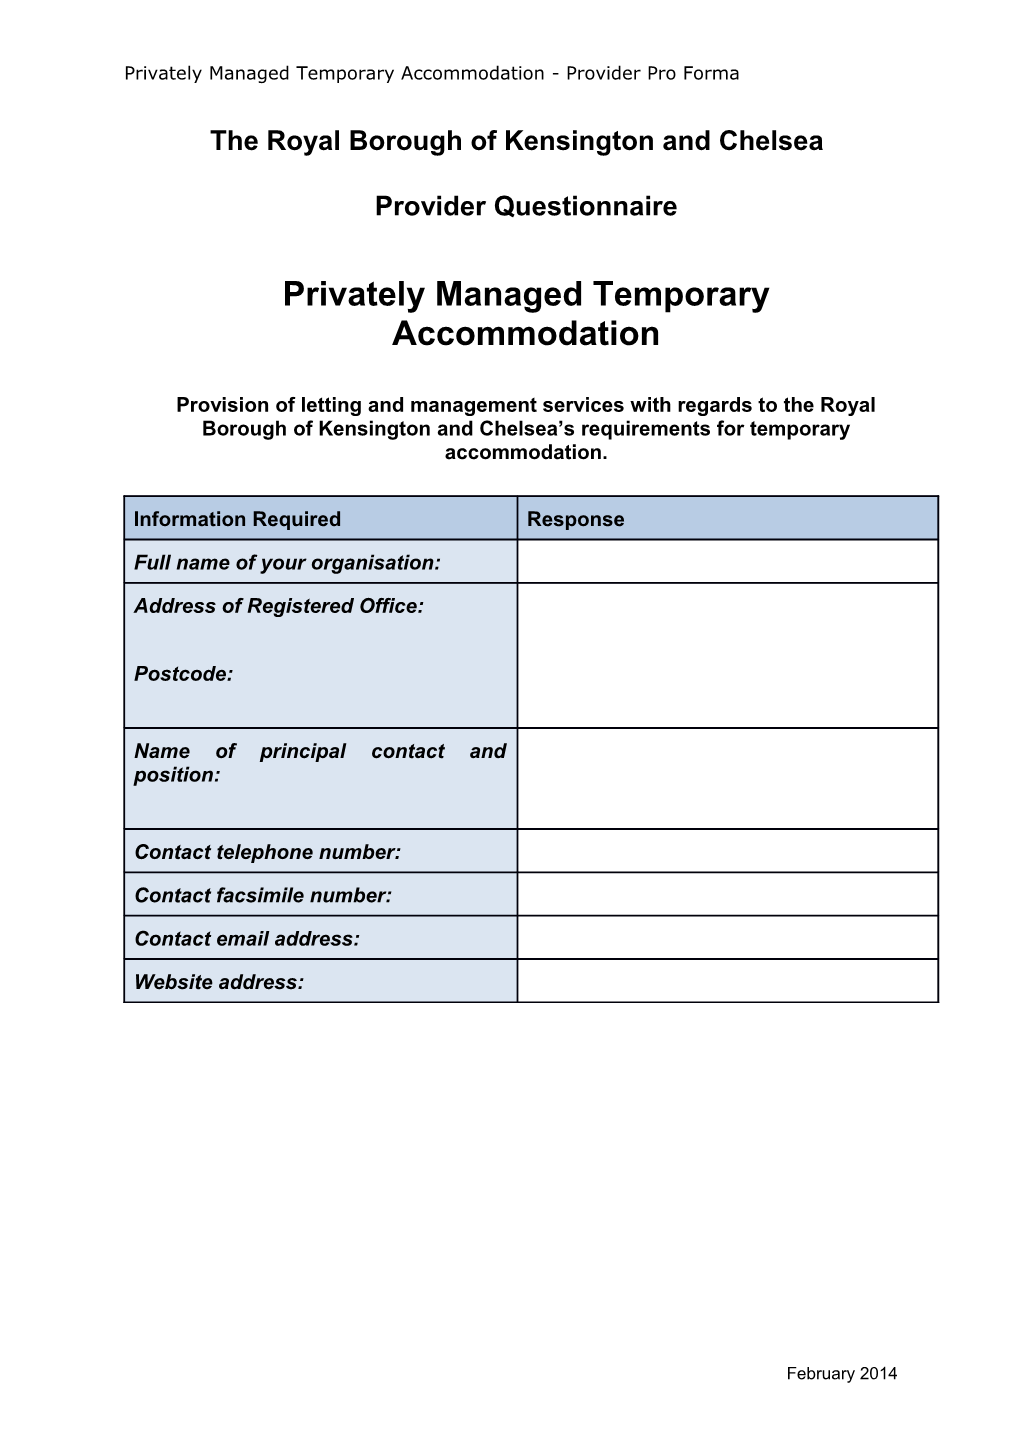 Privately Managed Temporary Accommodation Provider Questionnaire